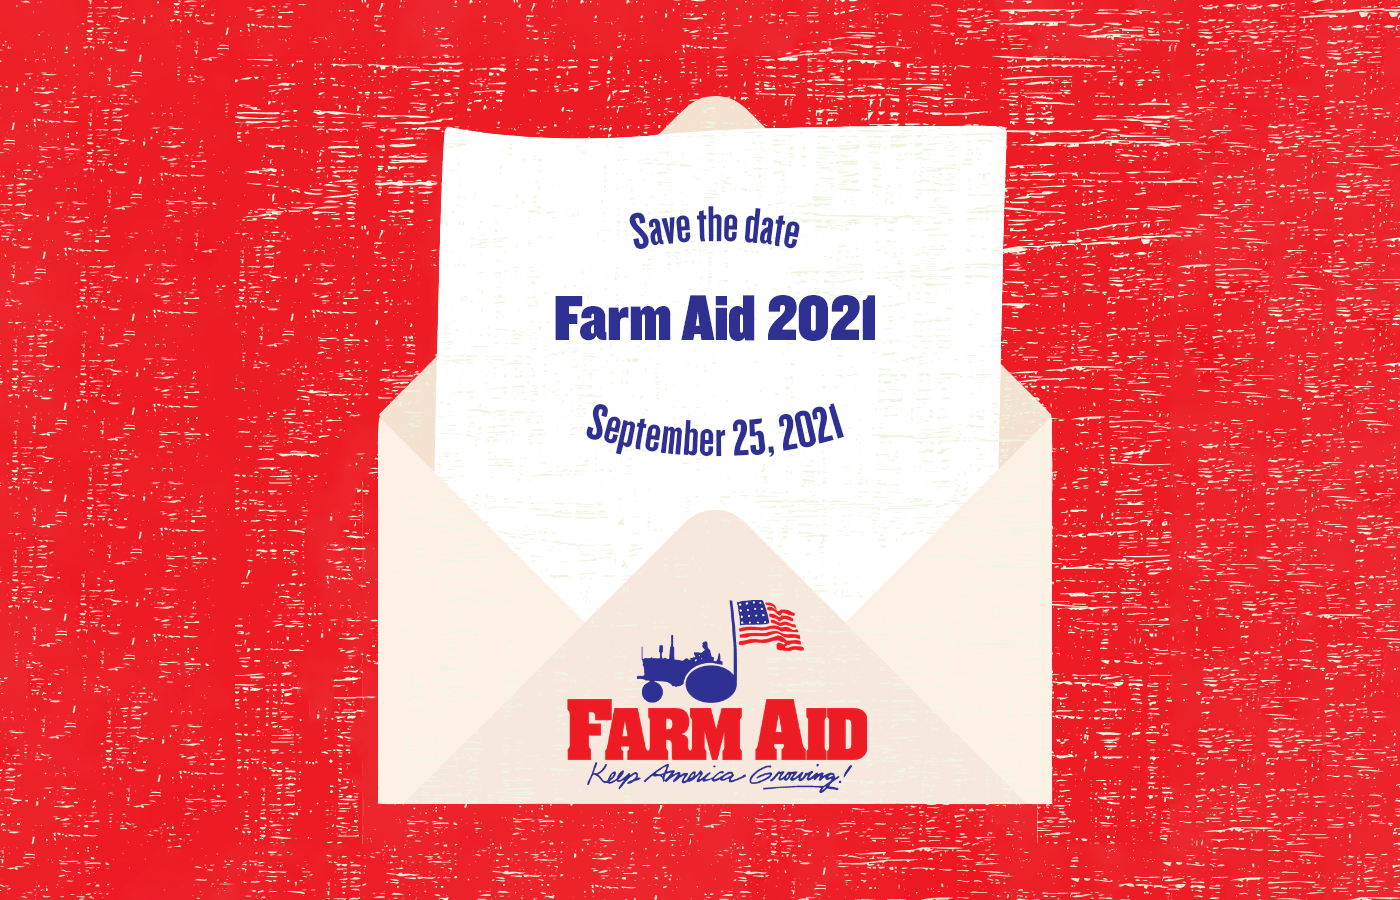 Farm Aid 2021 will be an inperson festival on September 25